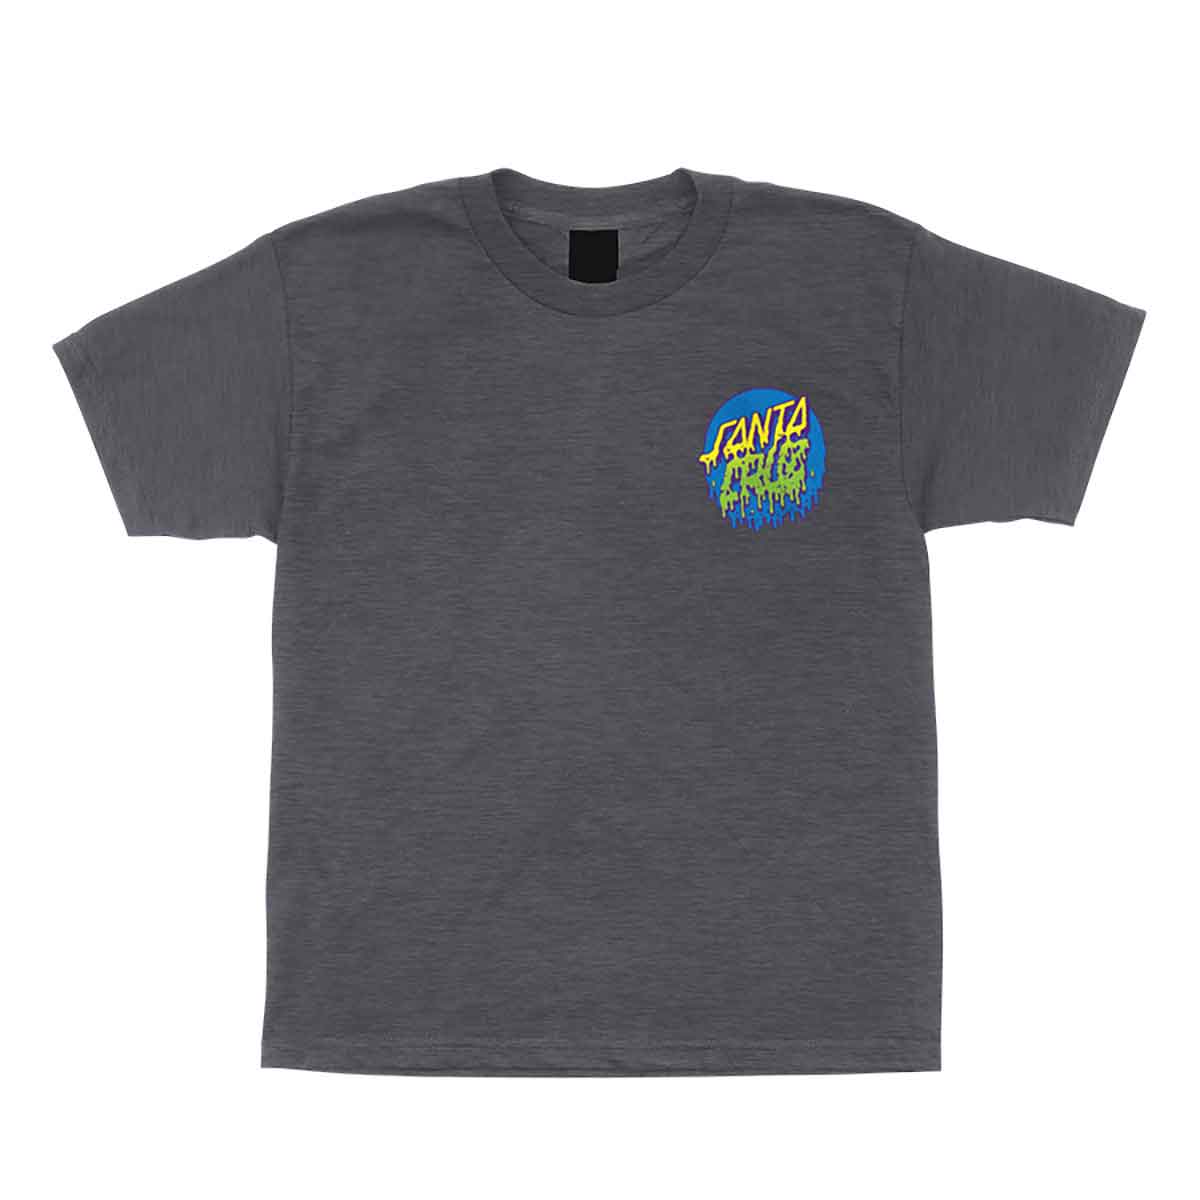 Rad Dot Youth S/S Tee Shirt Chr/Hth (size options listed)